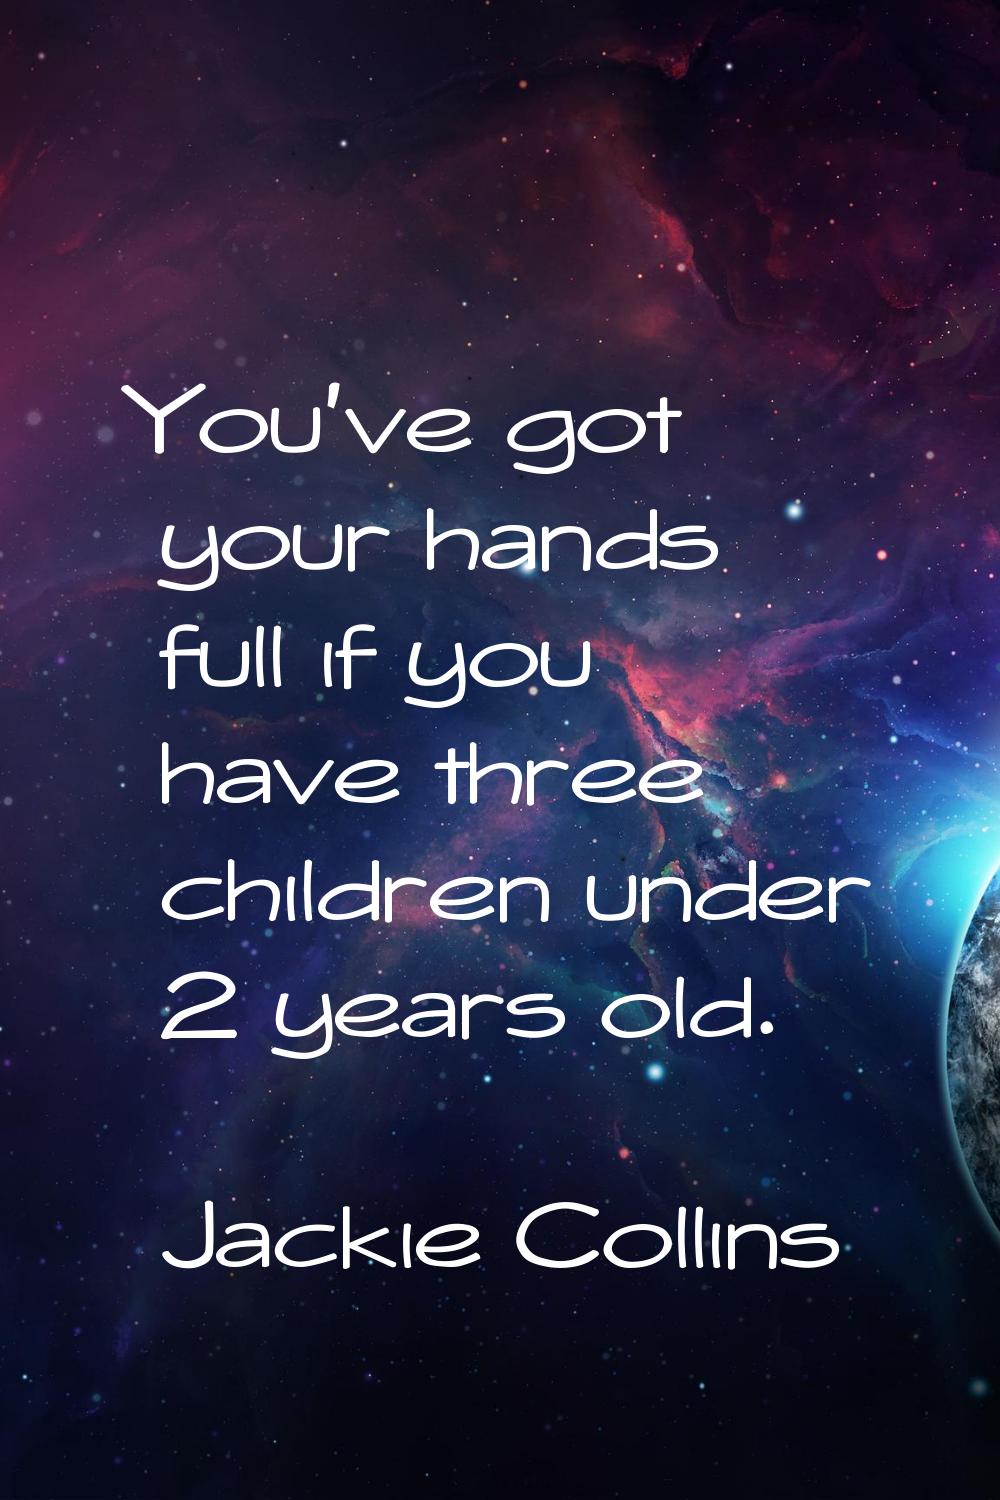 You've got your hands full if you have three children under 2 years old.